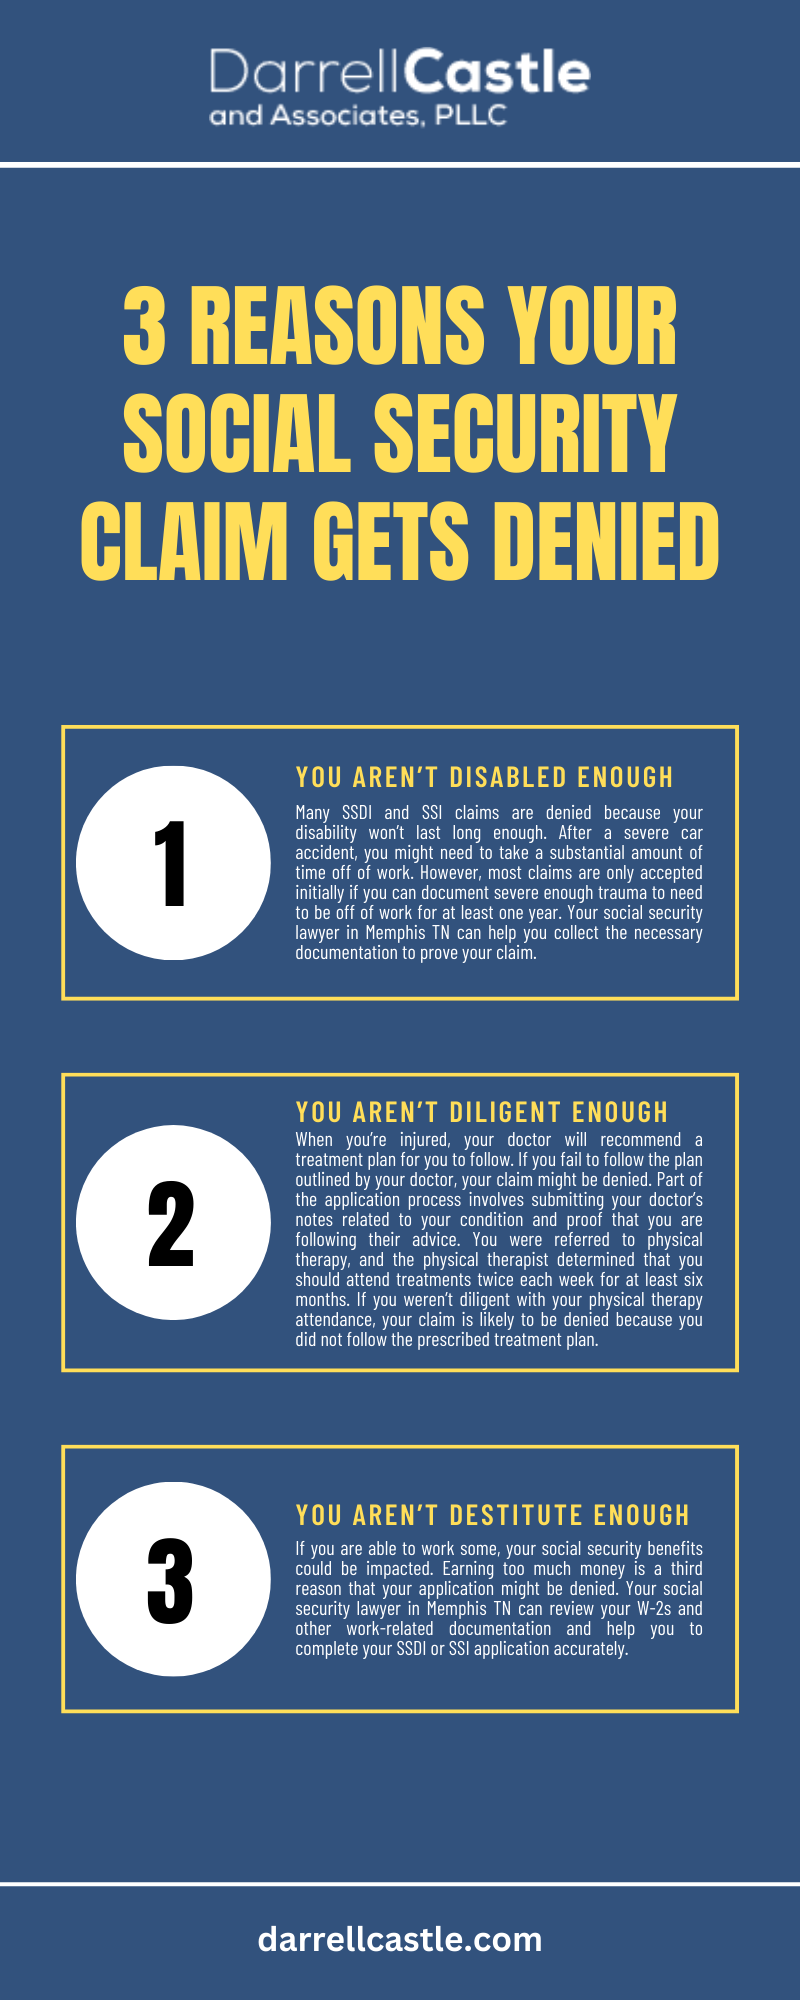 3 REASONS YOUR SOCIAL SECURITY CLAIM GETS DENIED INFOGRAPHIC